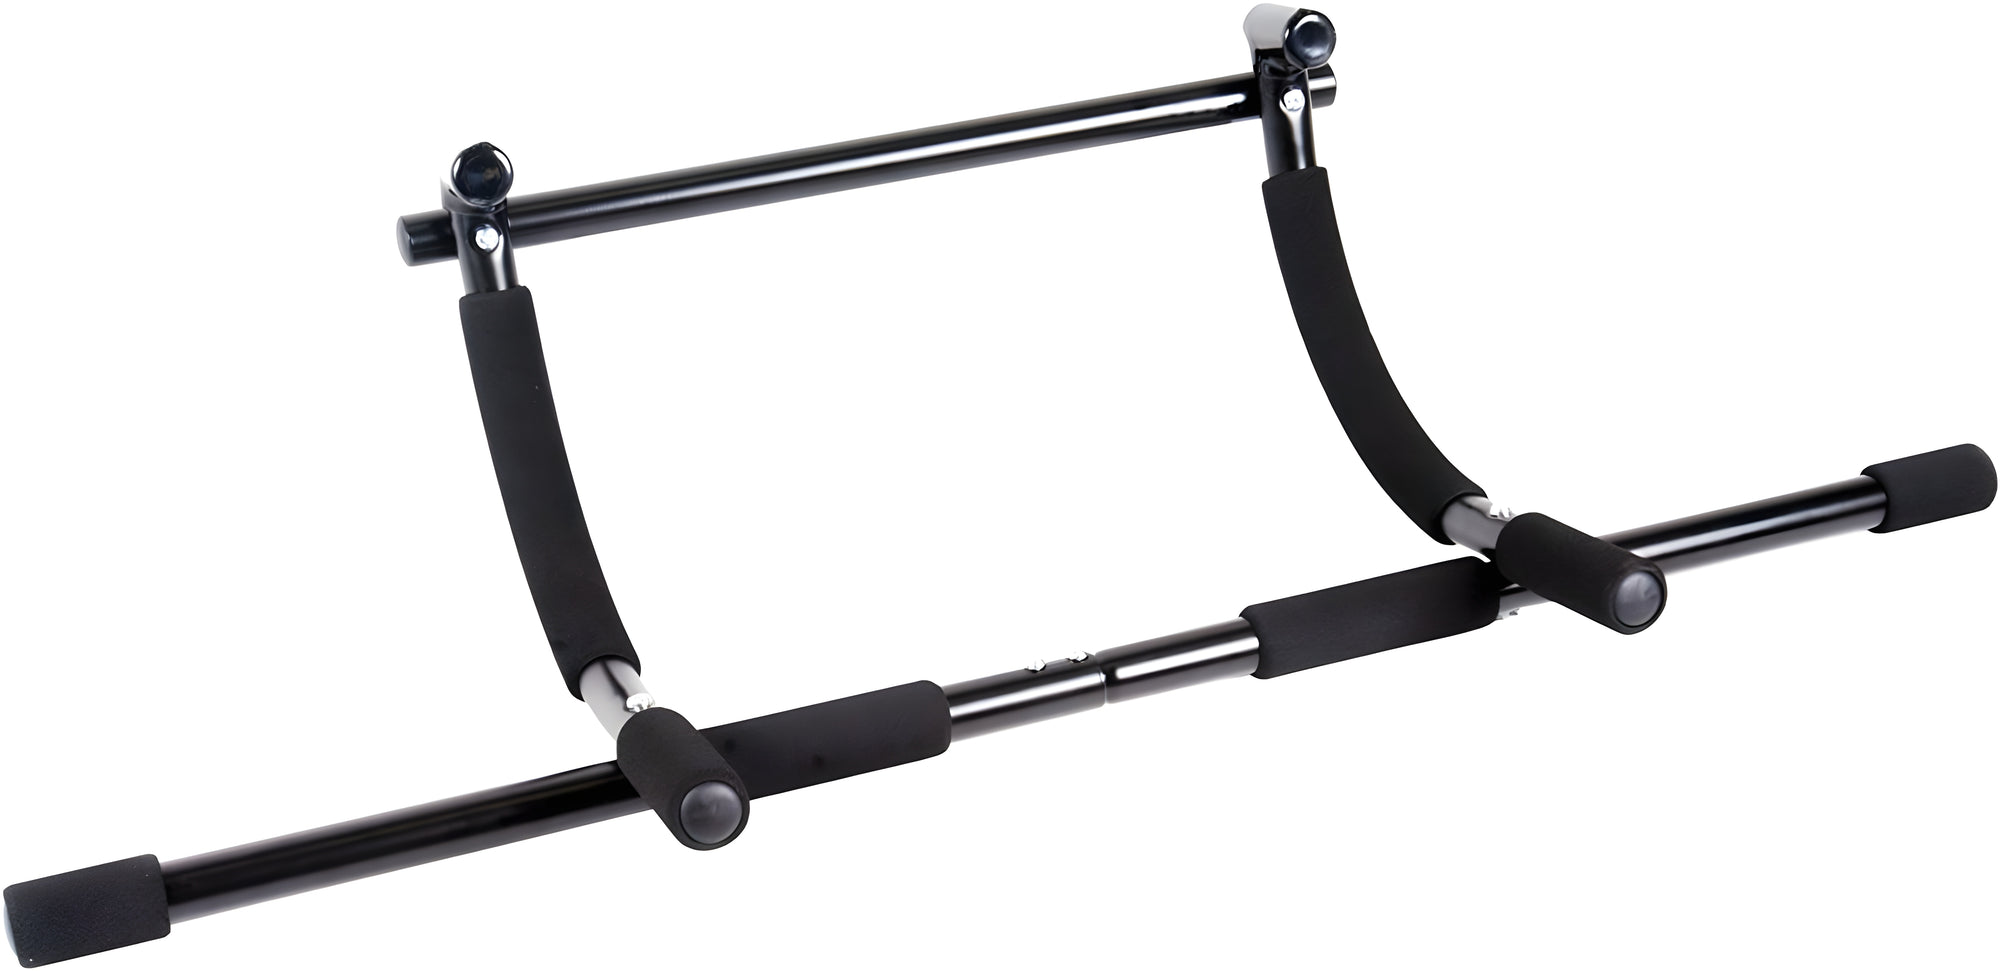 CAP Barbell Xtreme Doorway Pull Up Bar